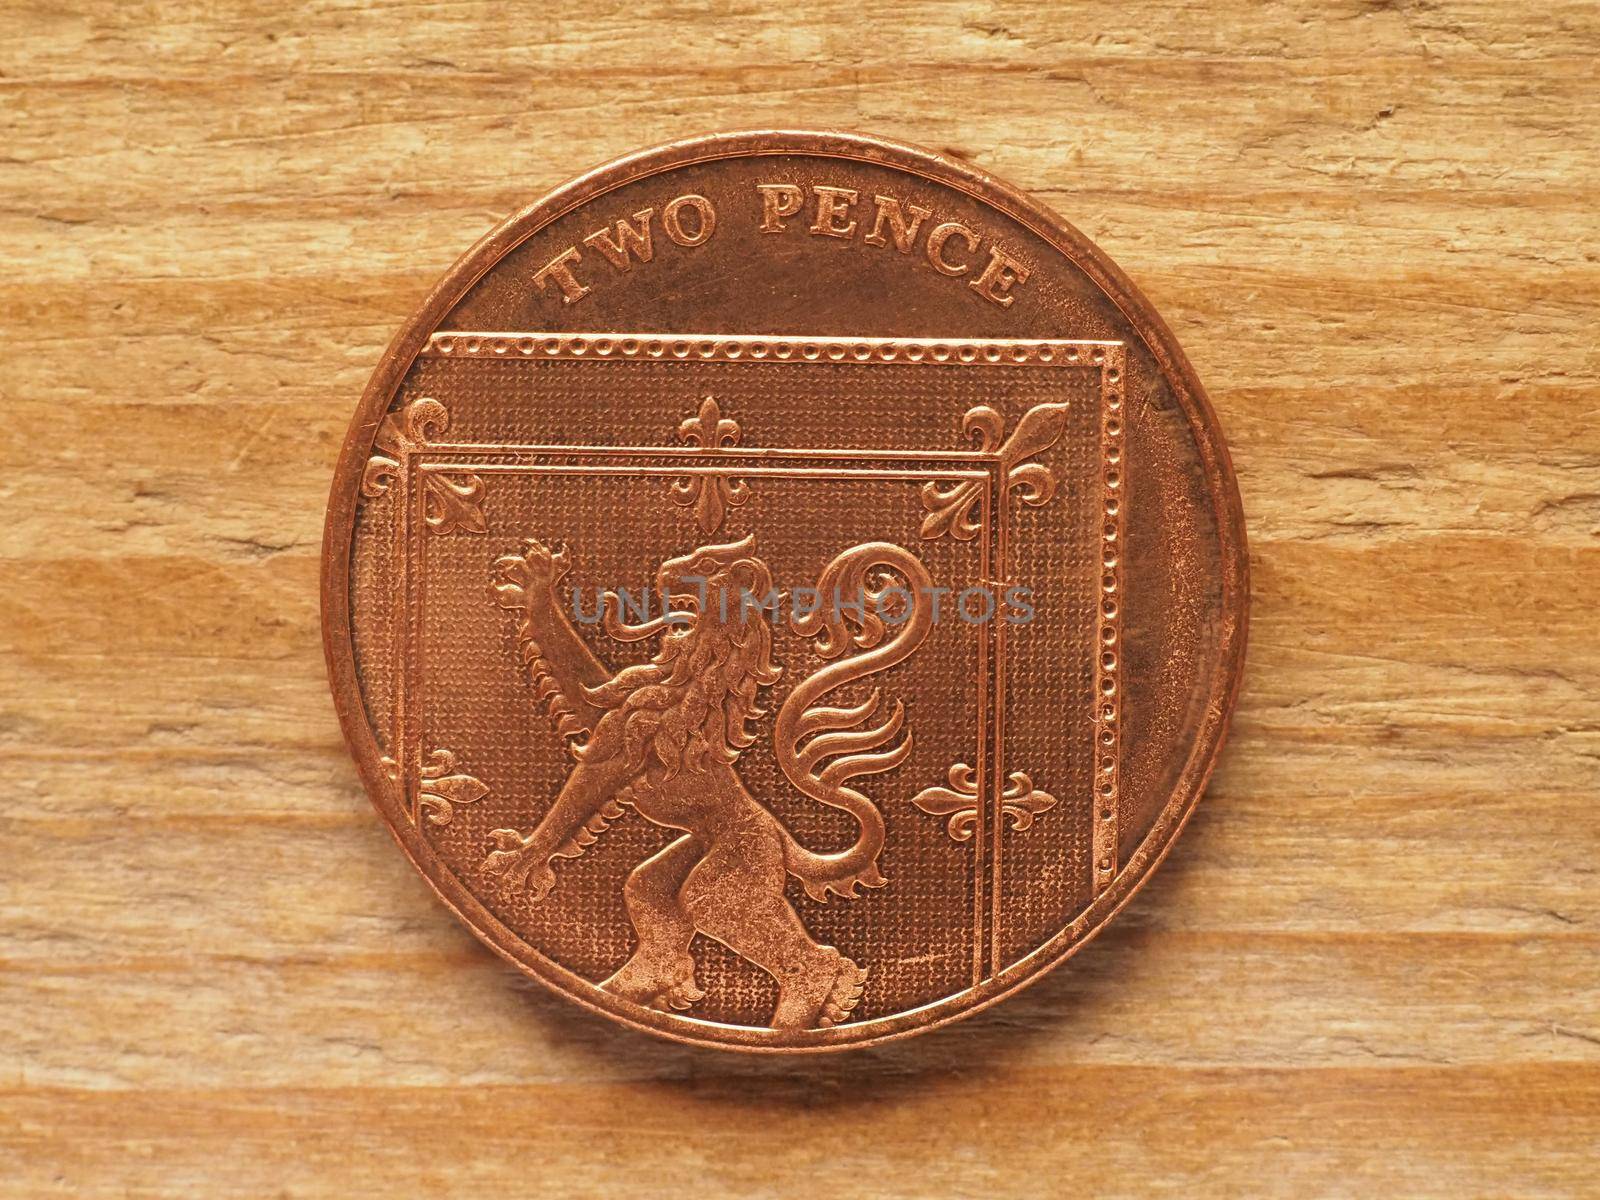 two pence coin reverse side, currency of the United Kingdom